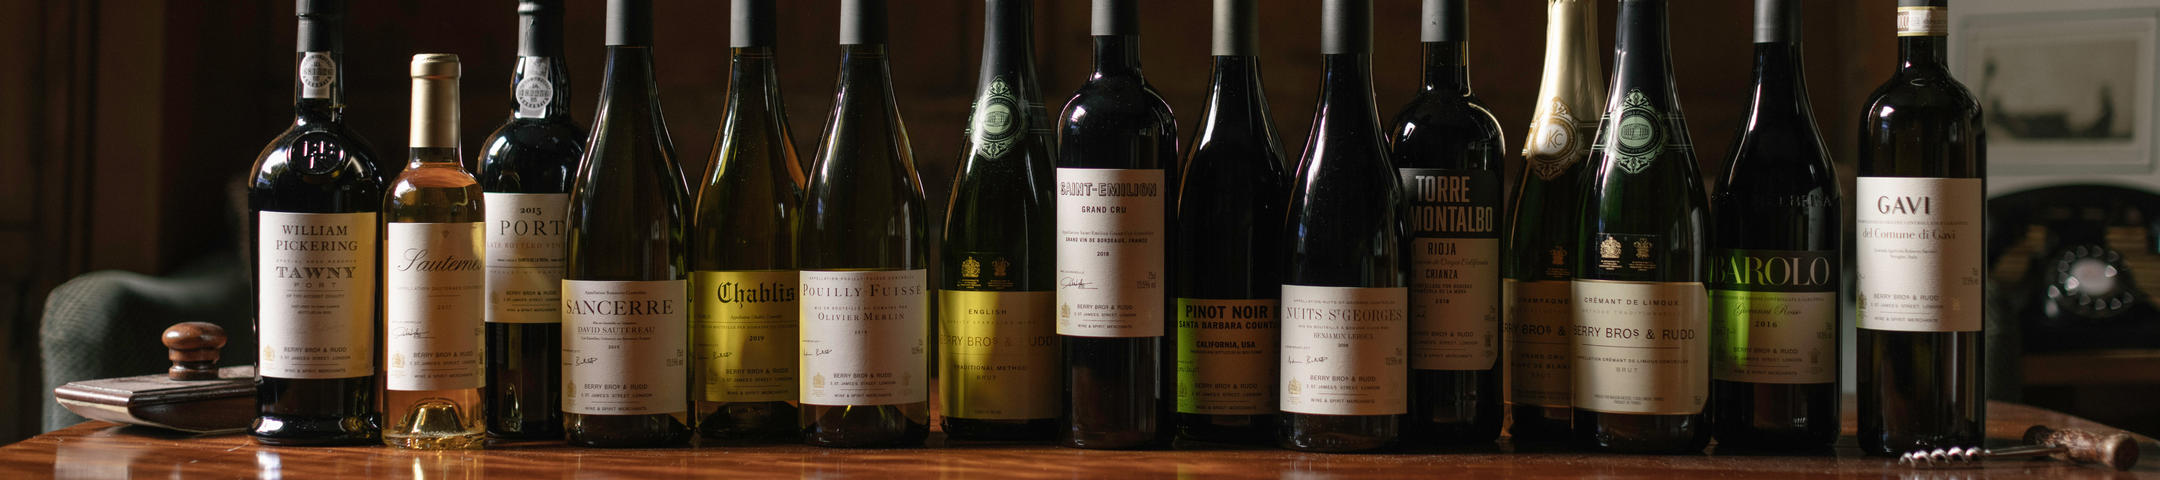 Berry Bros. & Rudd Own Selection Wines 